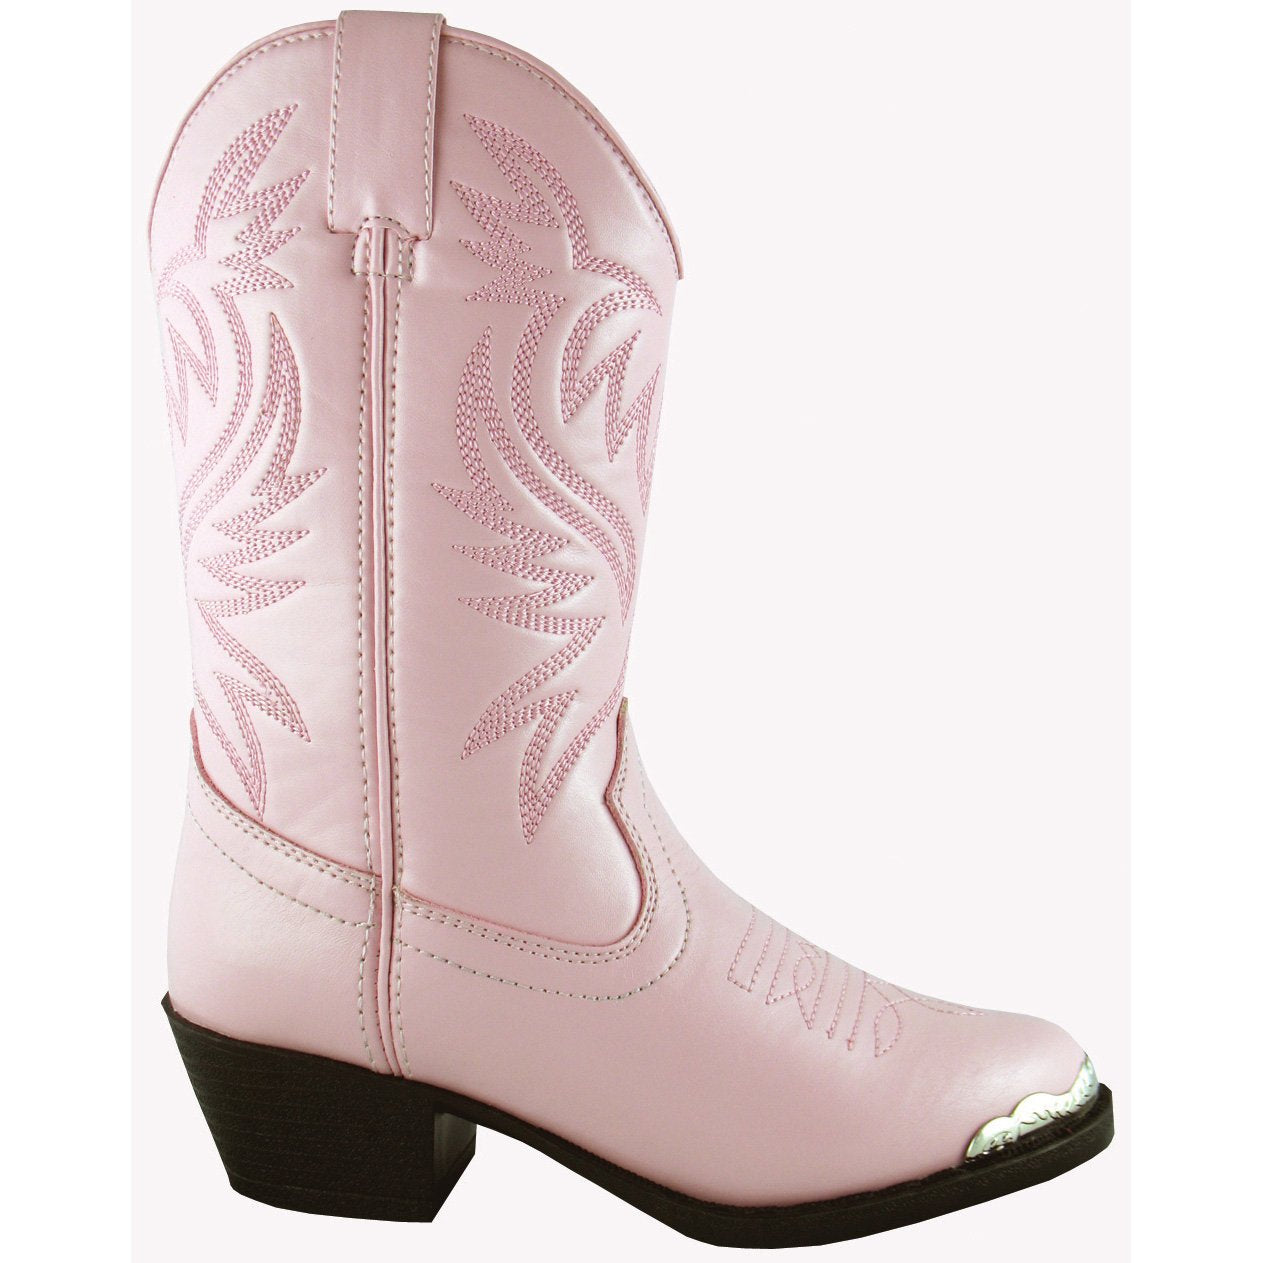 Smoky Mountain Girl's Toddler Lt. Pink Western Boot